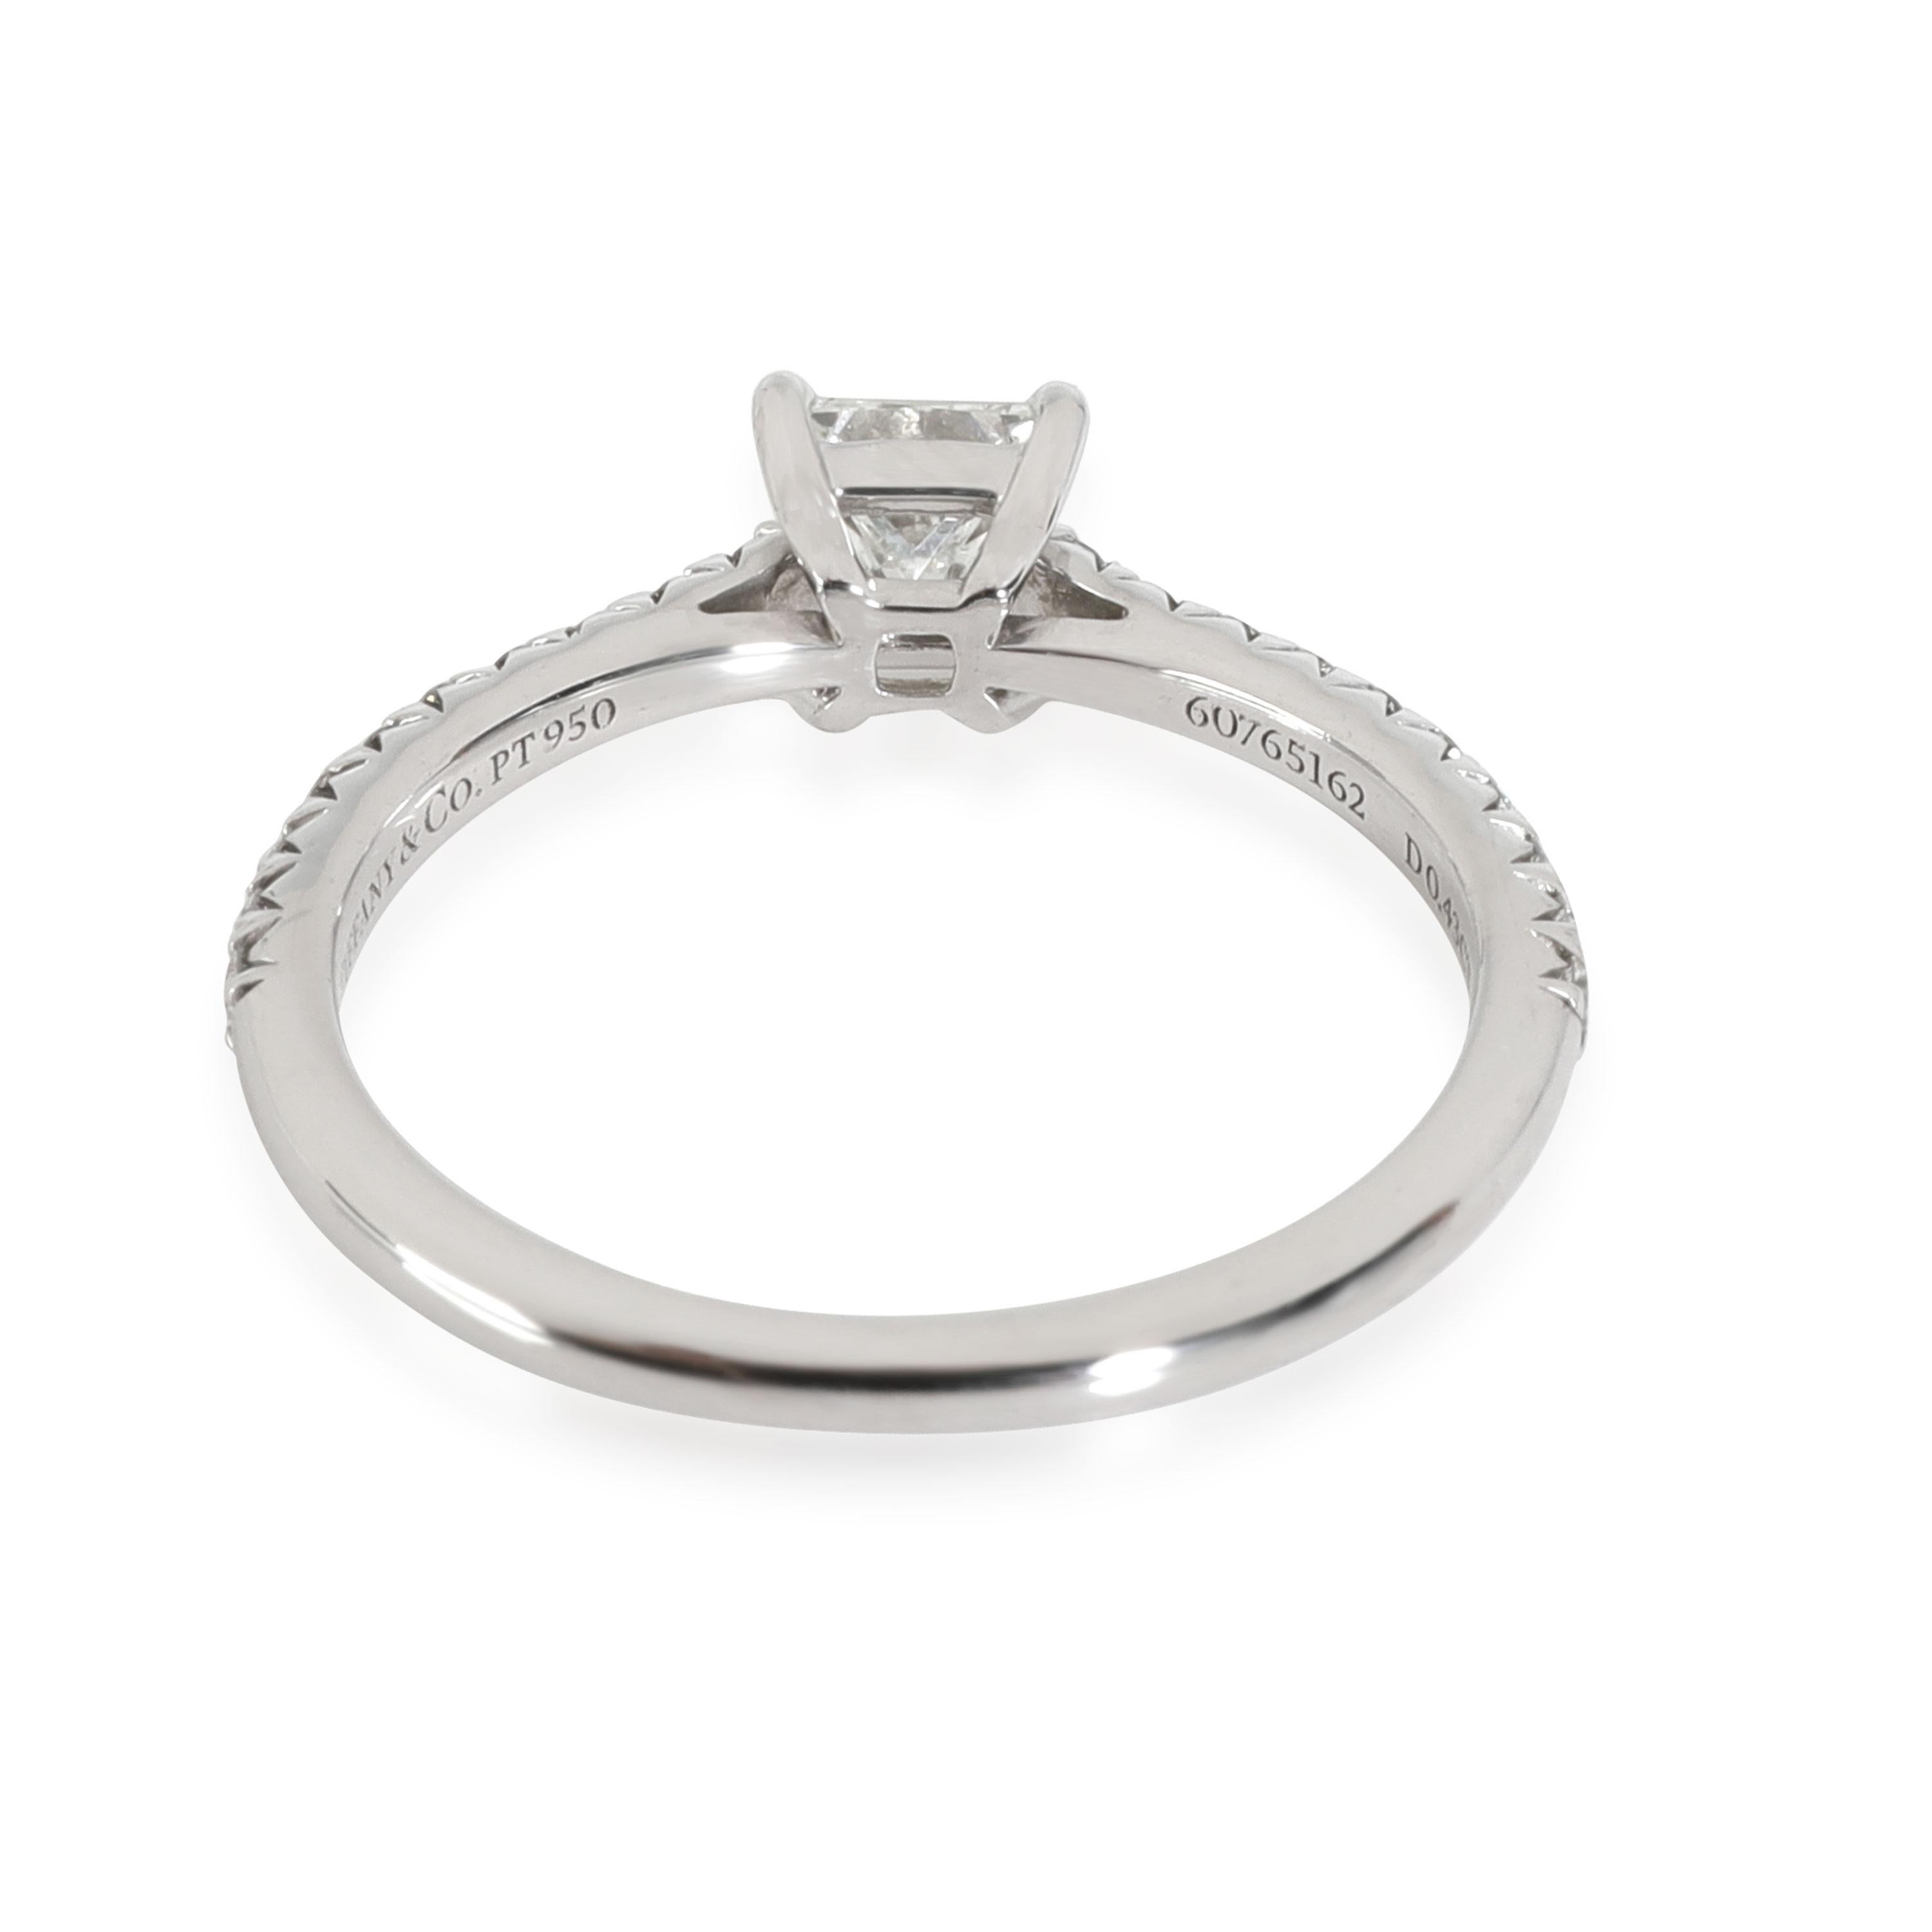 Tiffany & Co. Novo Diamond Engagement Ring in Platinum G VS1 0.59CTW

PRIMARY DETAILS
SKU: 116454
Listing Title: Tiffany & Co. Novo Diamond Engagement Ring in Platinum G VS1 0.59CTW
Condition Description: Retails for 4500 USD. In excellent condition